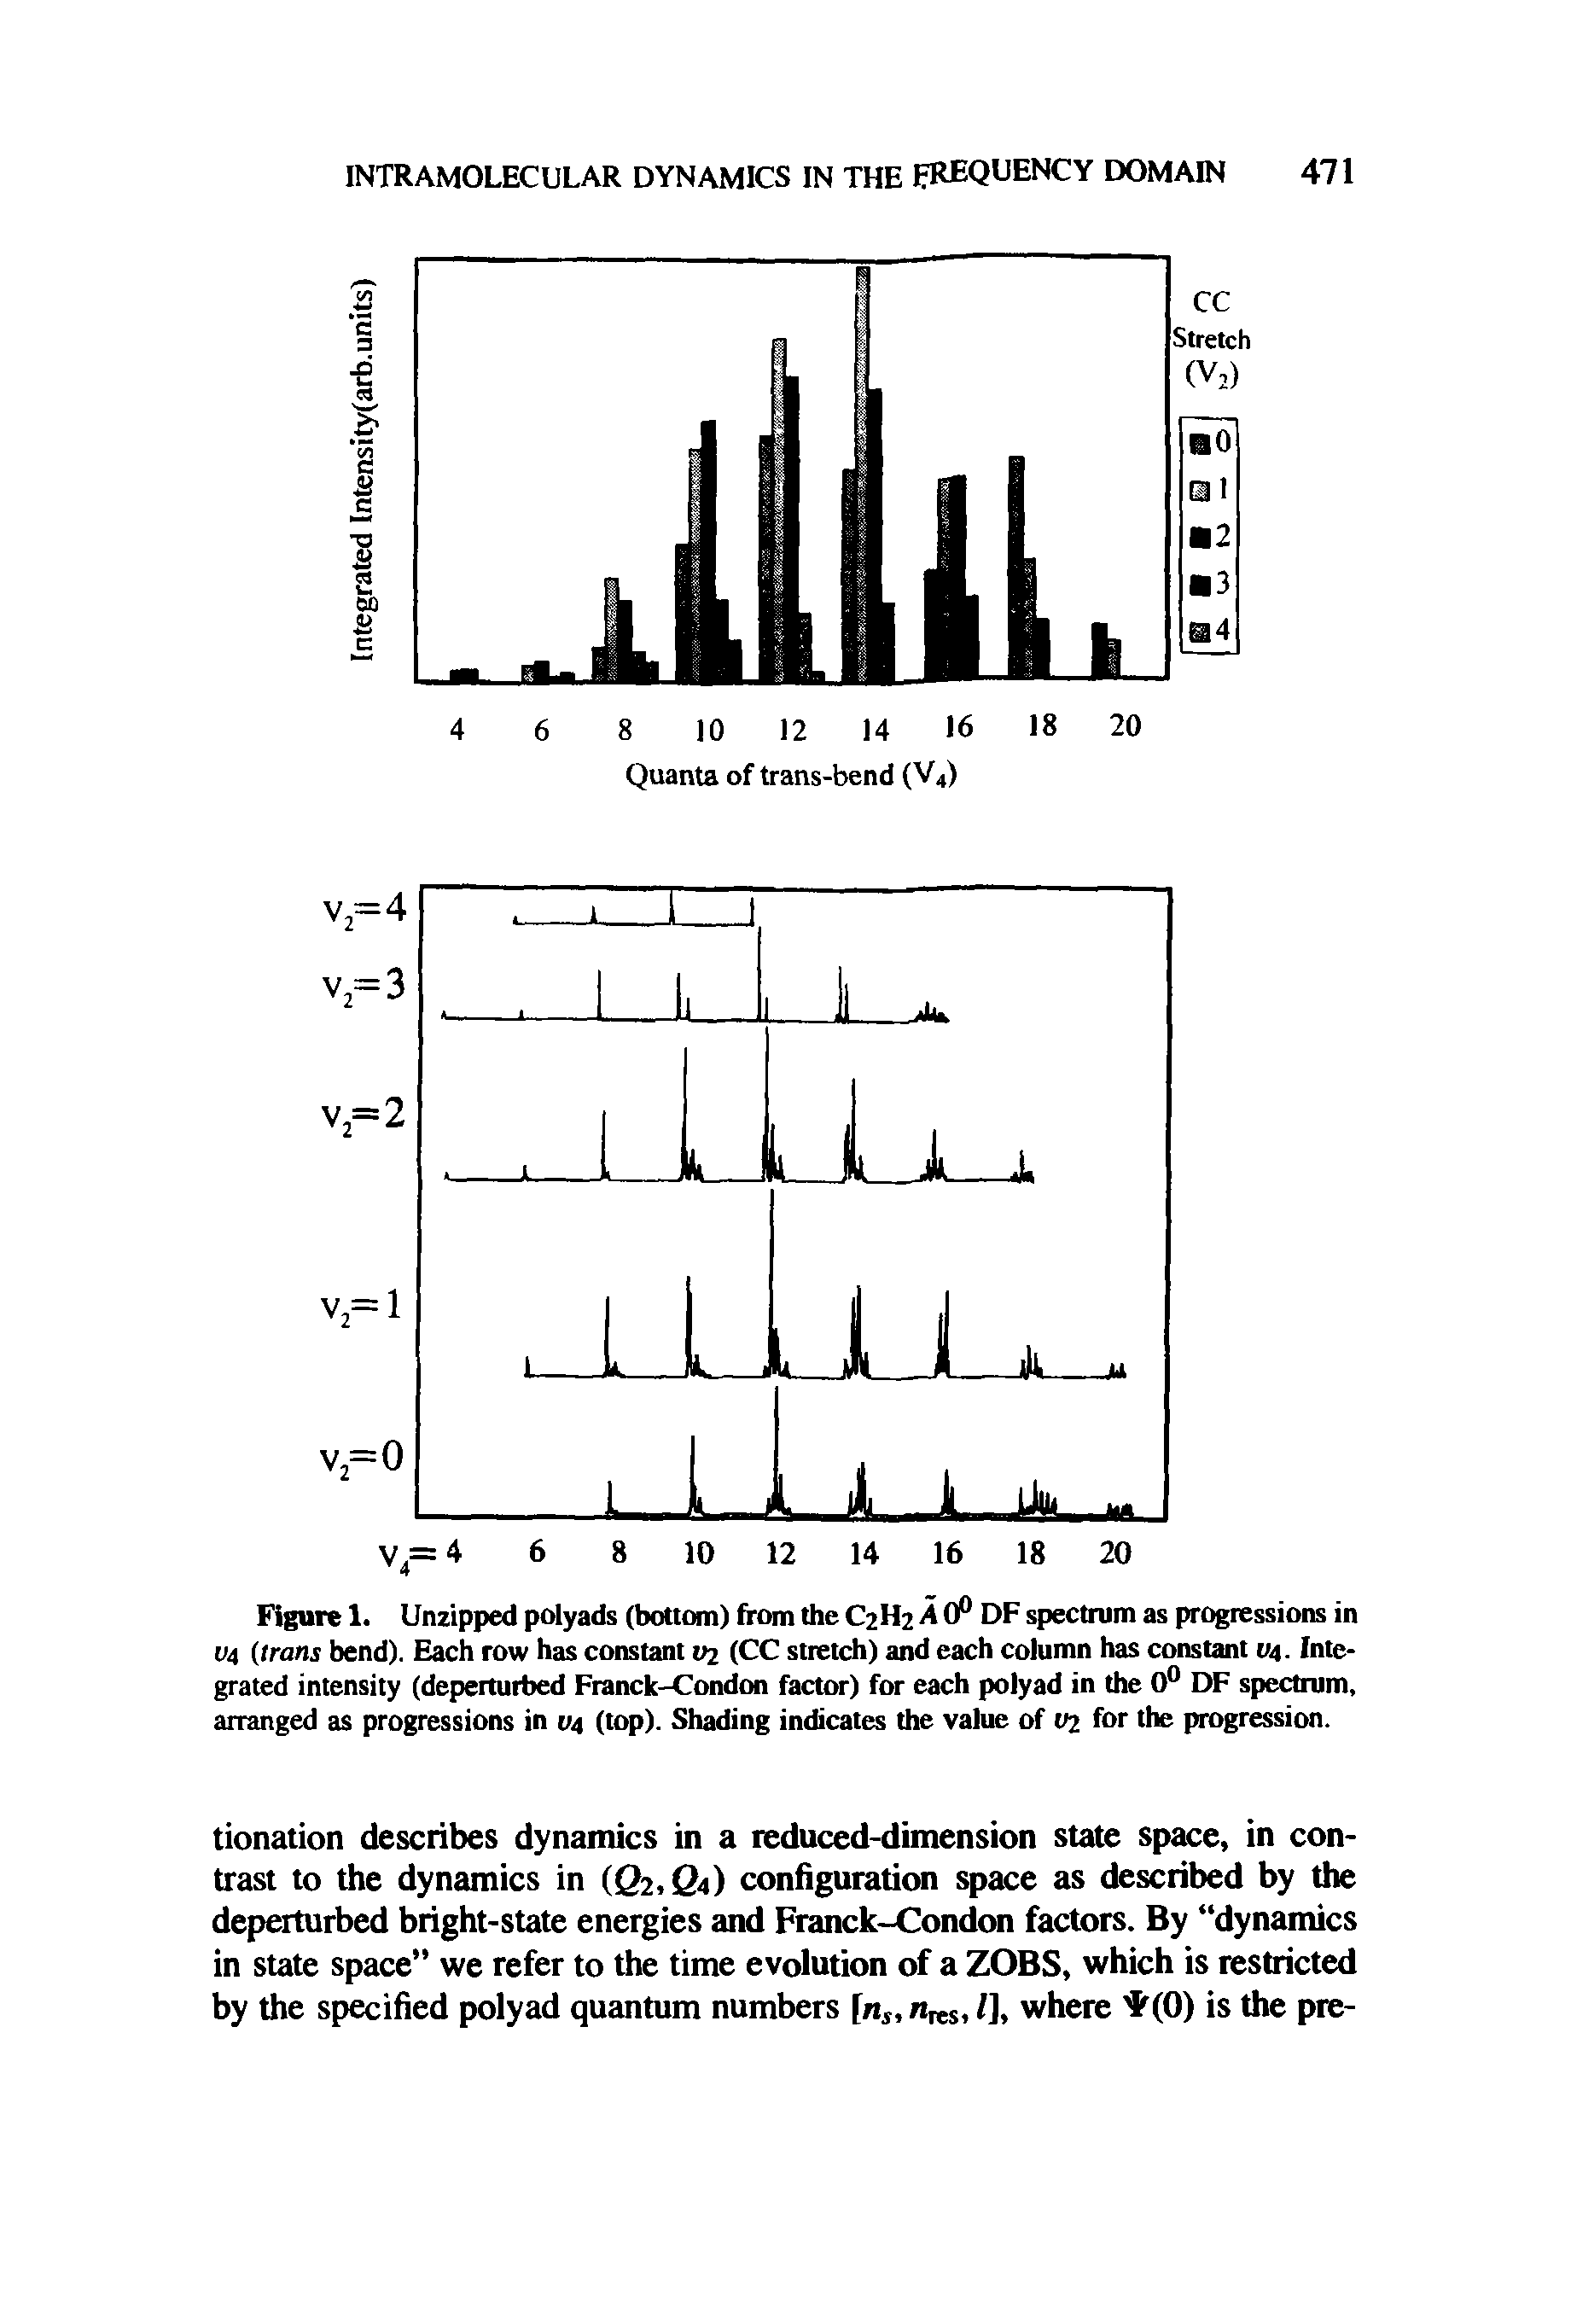 Figure 1. Unzipped polyads (bottom) from the C2H2 A 0° DF spectrum as progressions in 04 (trans bend). Each row has constant vz (CC stretch) and each column has constant 04. Integrated intensity (deperturbed Franck-Condon factor) for each polyad in the 0° DF spectrum, arranged as progressions in 04 (top). Shading indicates the value of V2 for the progression.